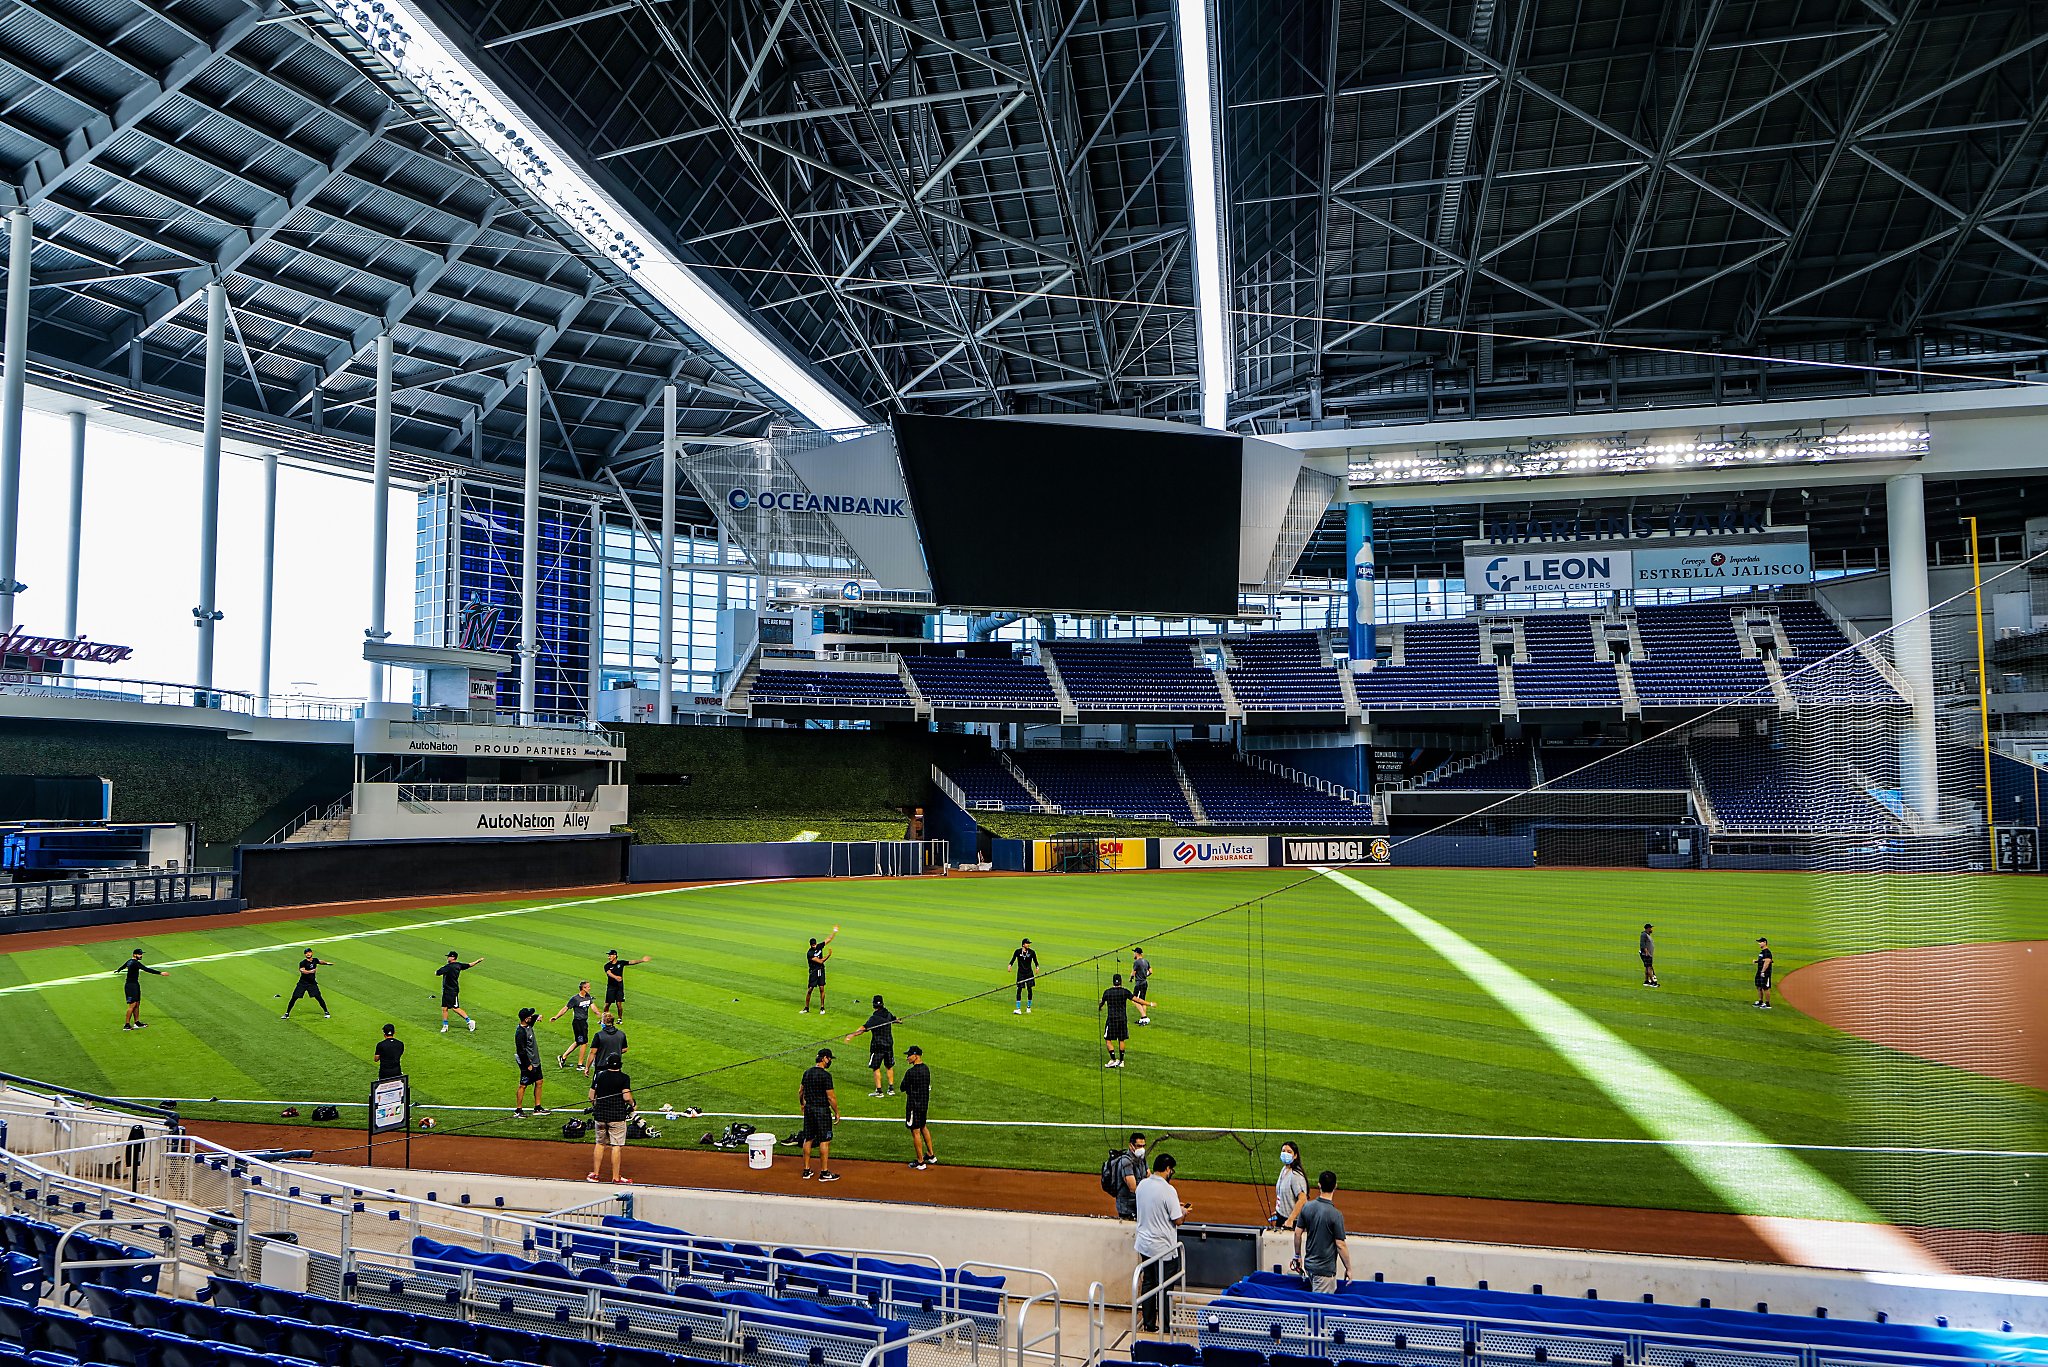 Marlins Park has synthetic turf installed